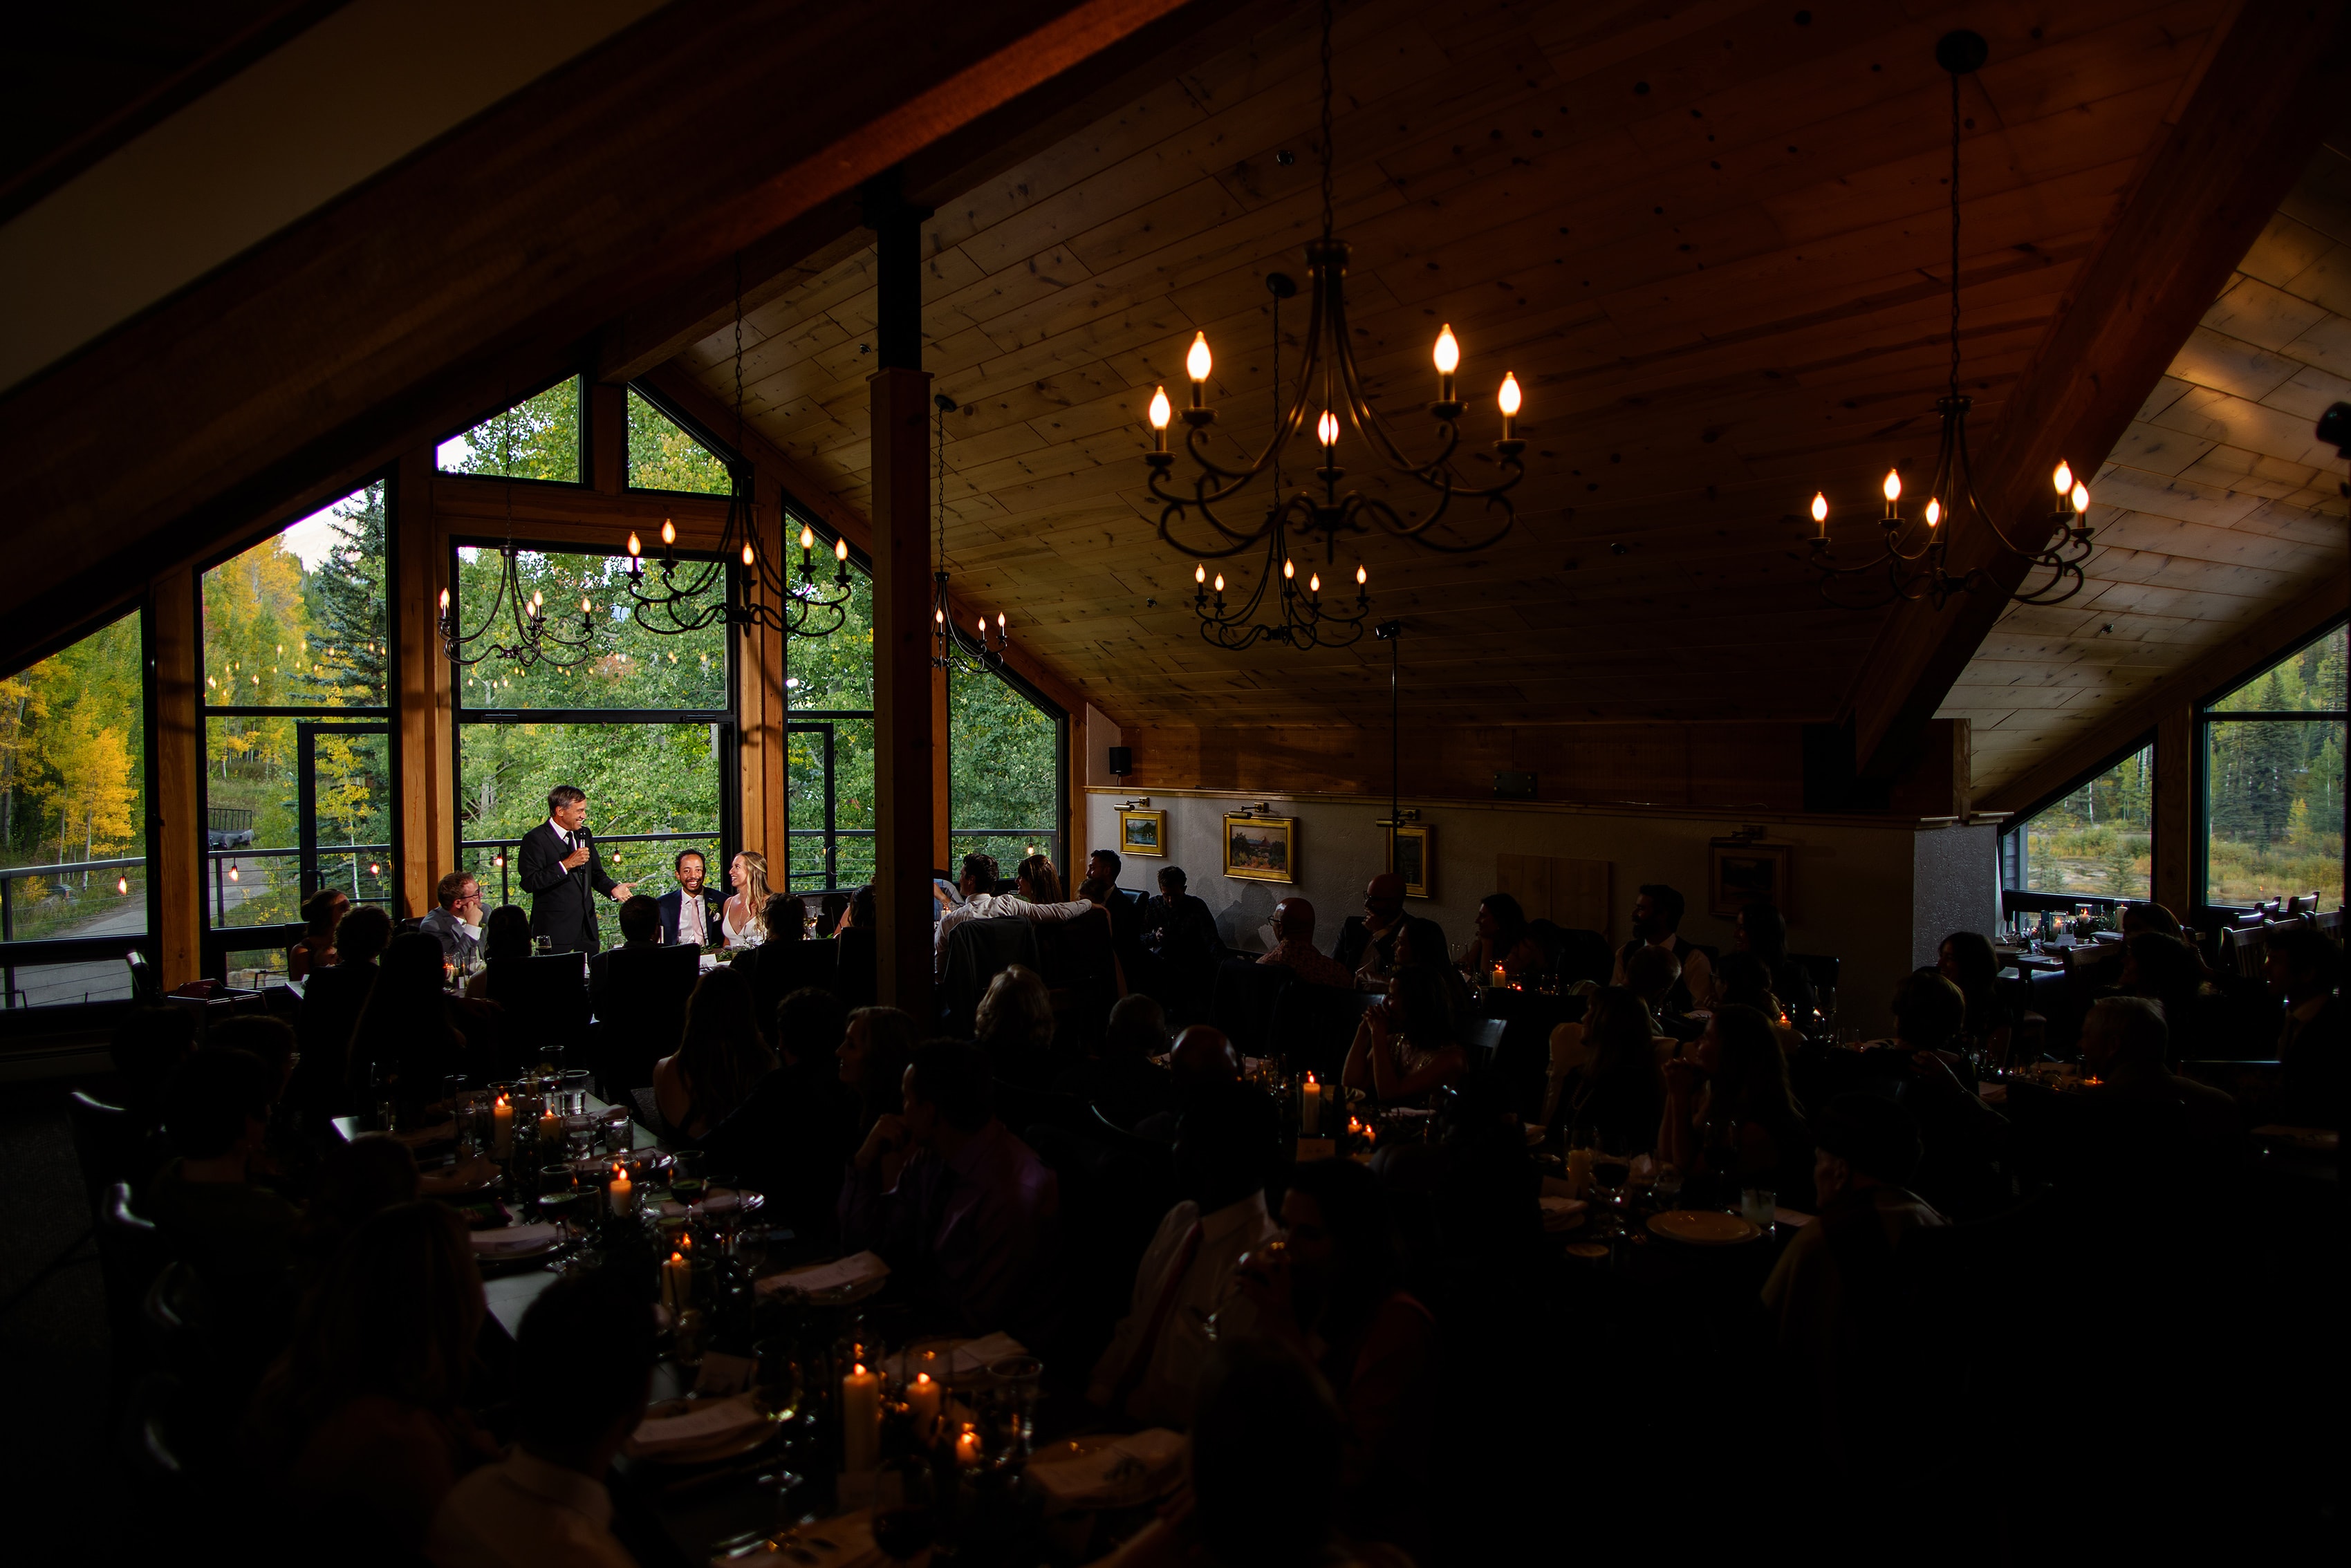 Justin Edmonds and Amy Brothers wedding at The Black Diamond Lodge in Durango